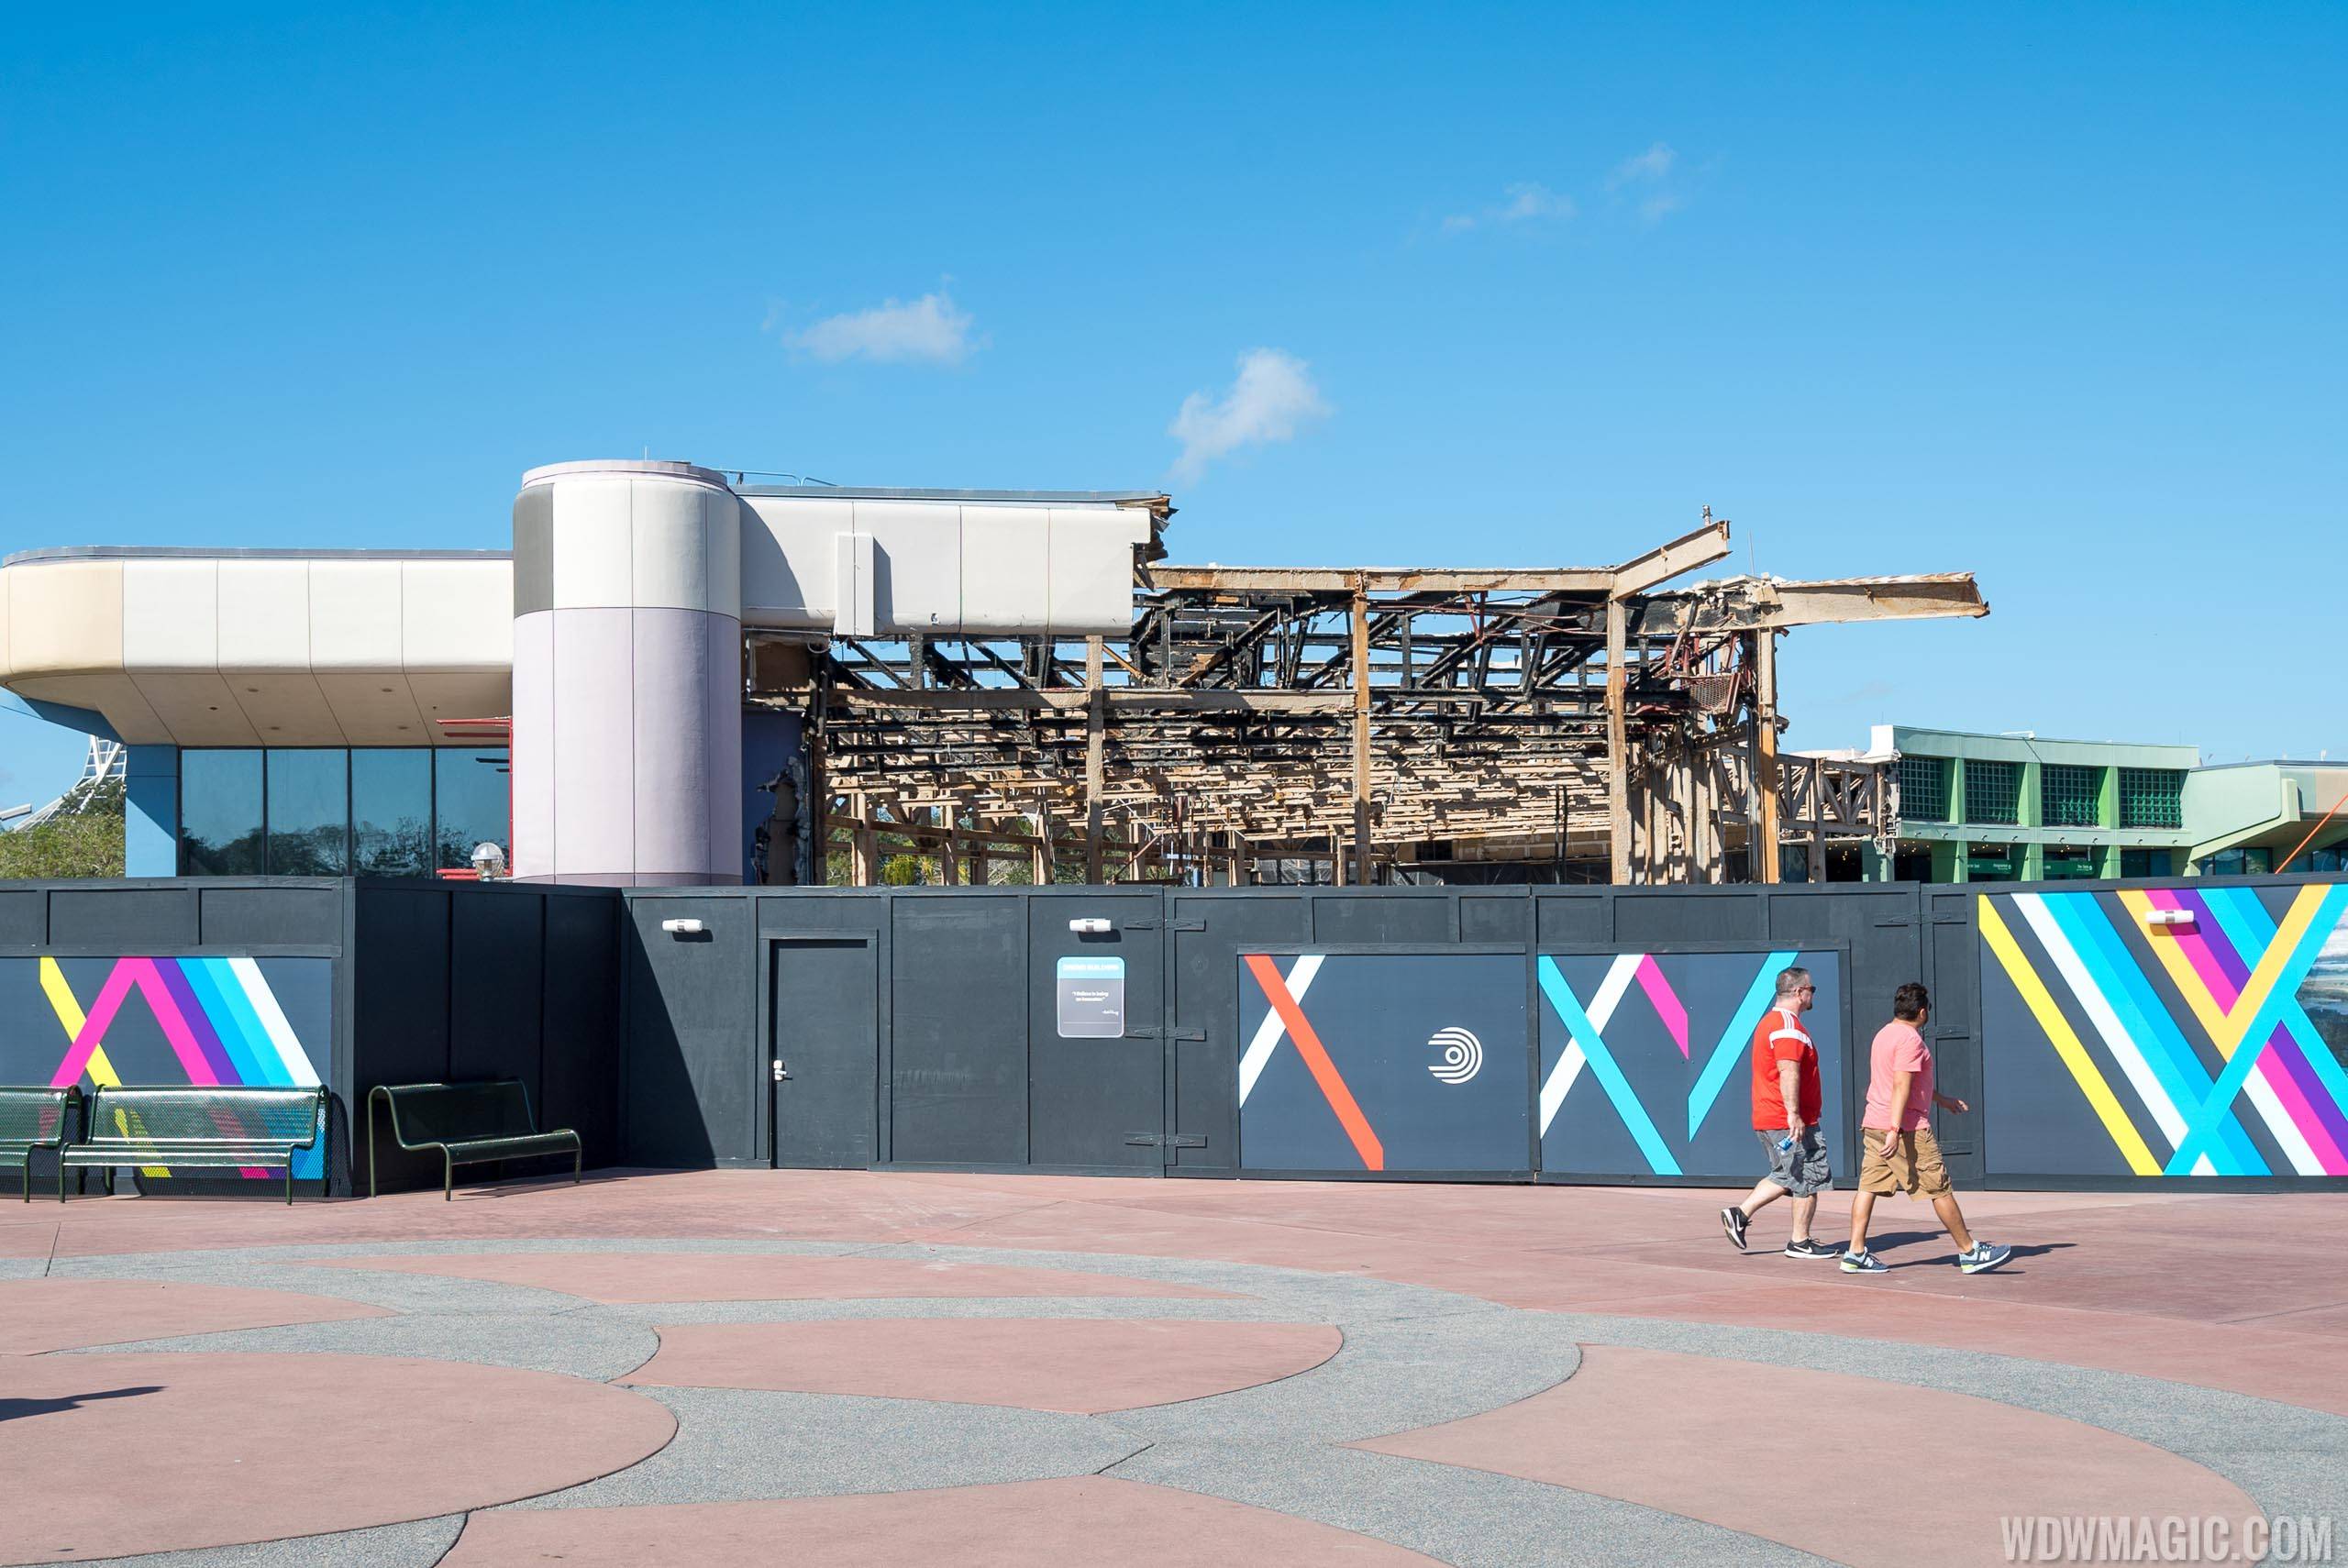 Epcot Future World West Demolition and Construction Walls - December 17 2019